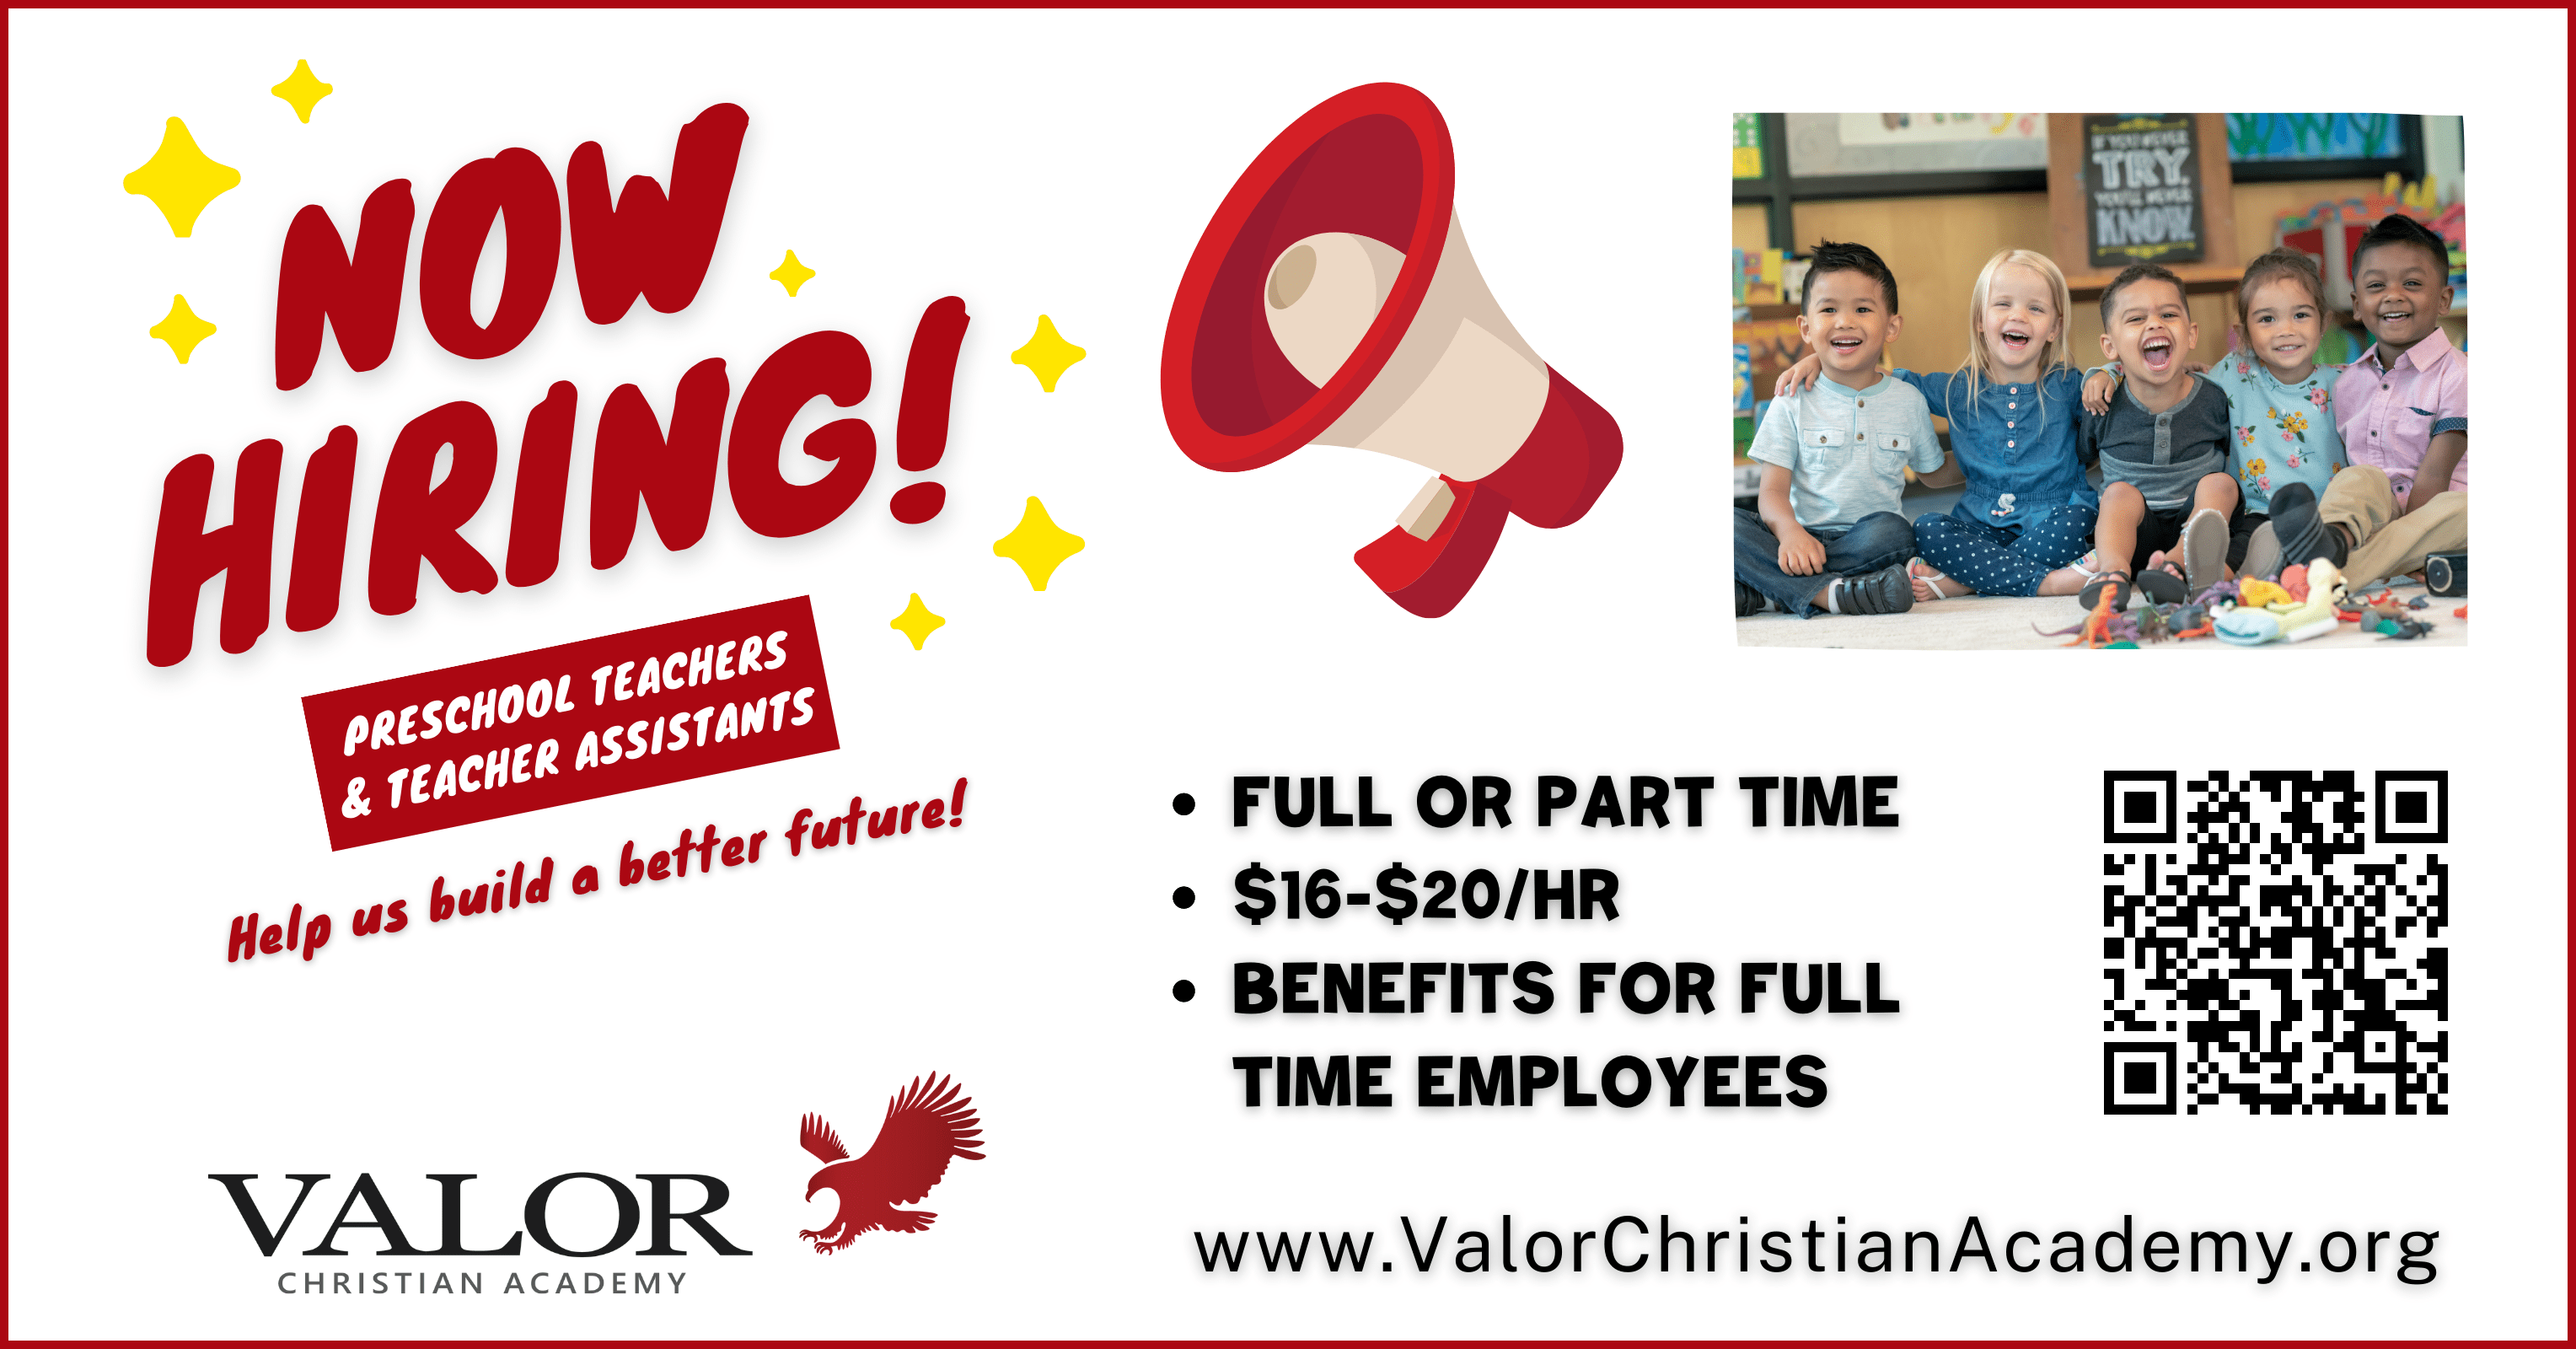 Valor is now hiring - please see our links below with PDFs for specific job vacancies.